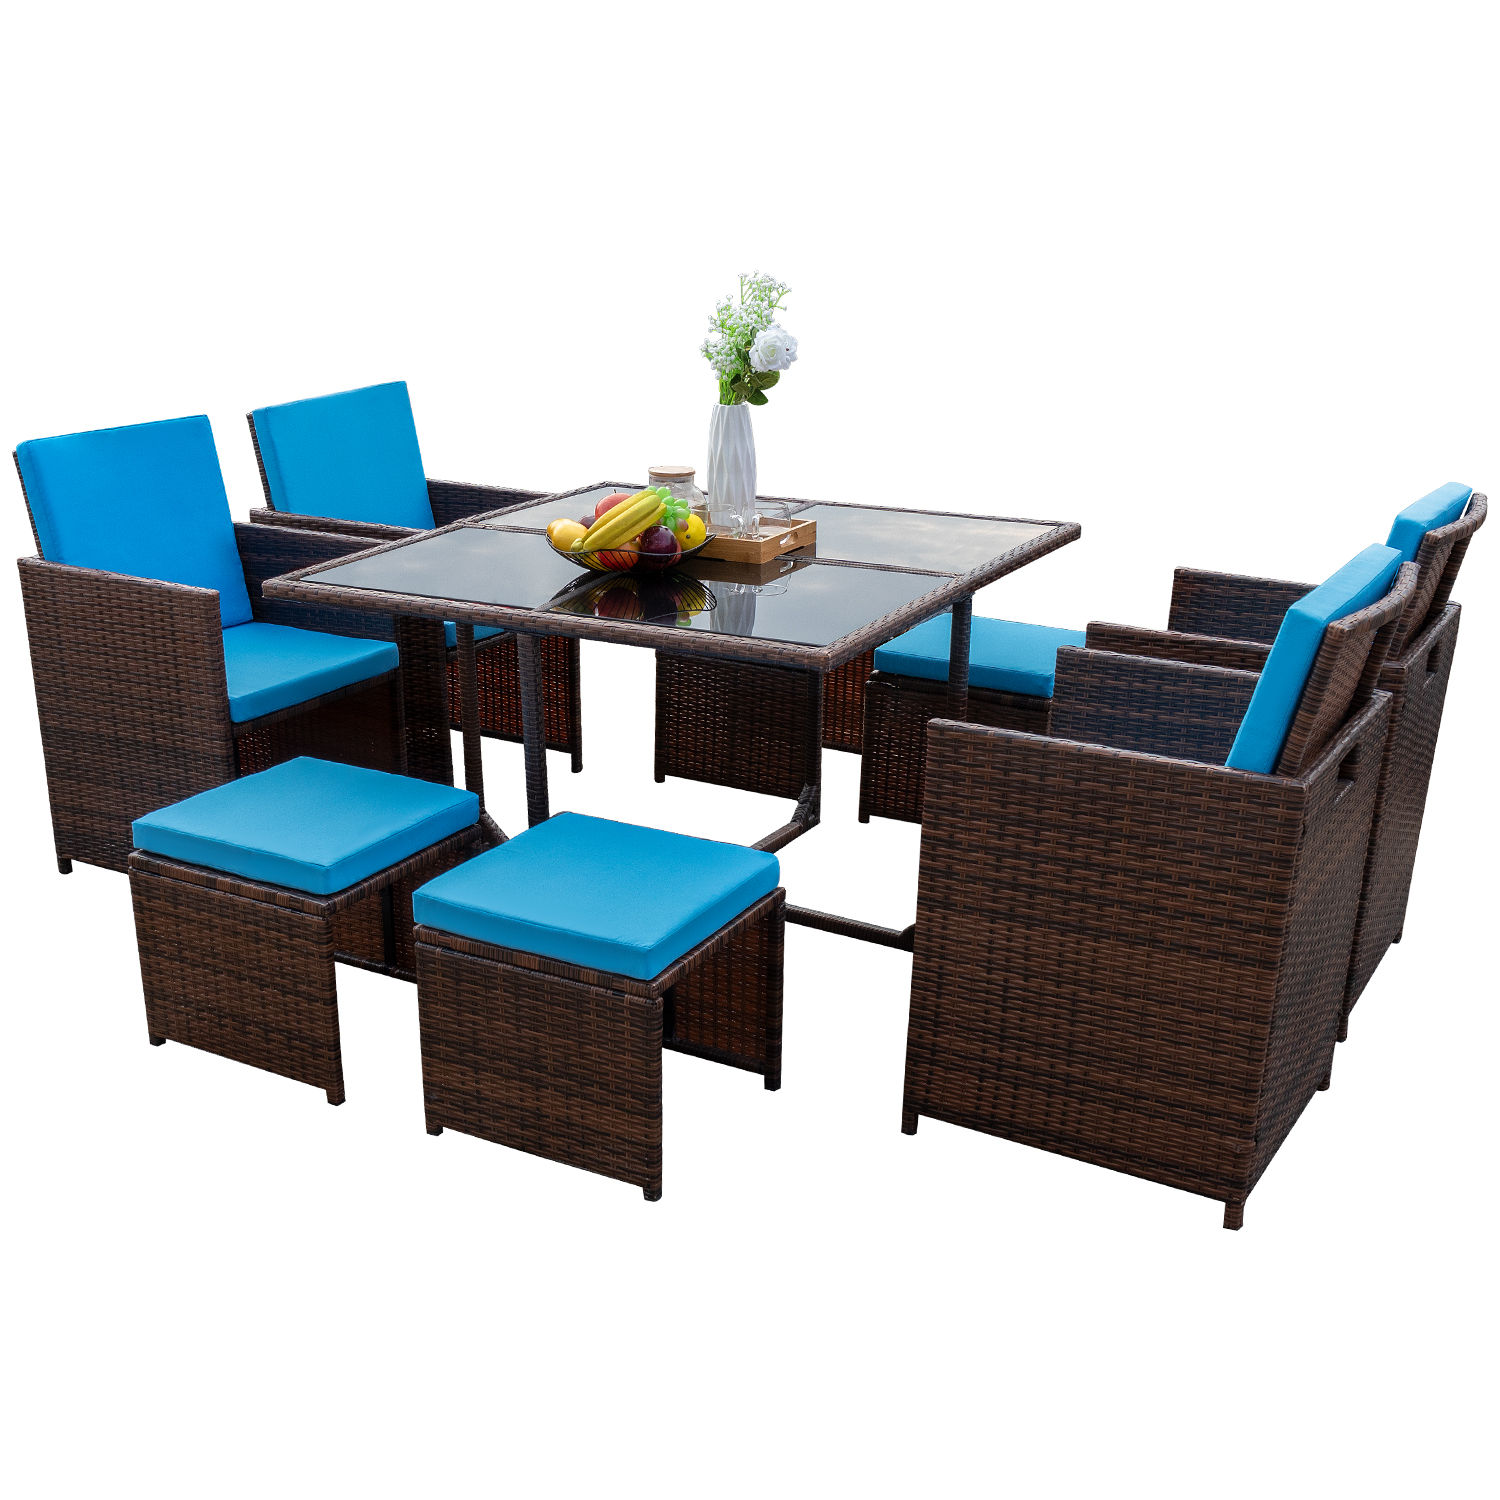 Lacoo 9 Pieces Patio Dining Sets Outdoor Furniture Patio Wicker Rattan Chairs and Tempered Glass Table Sectional Set Conversation Set Cushioned with Ottoman (Blue) - image 2 of 3